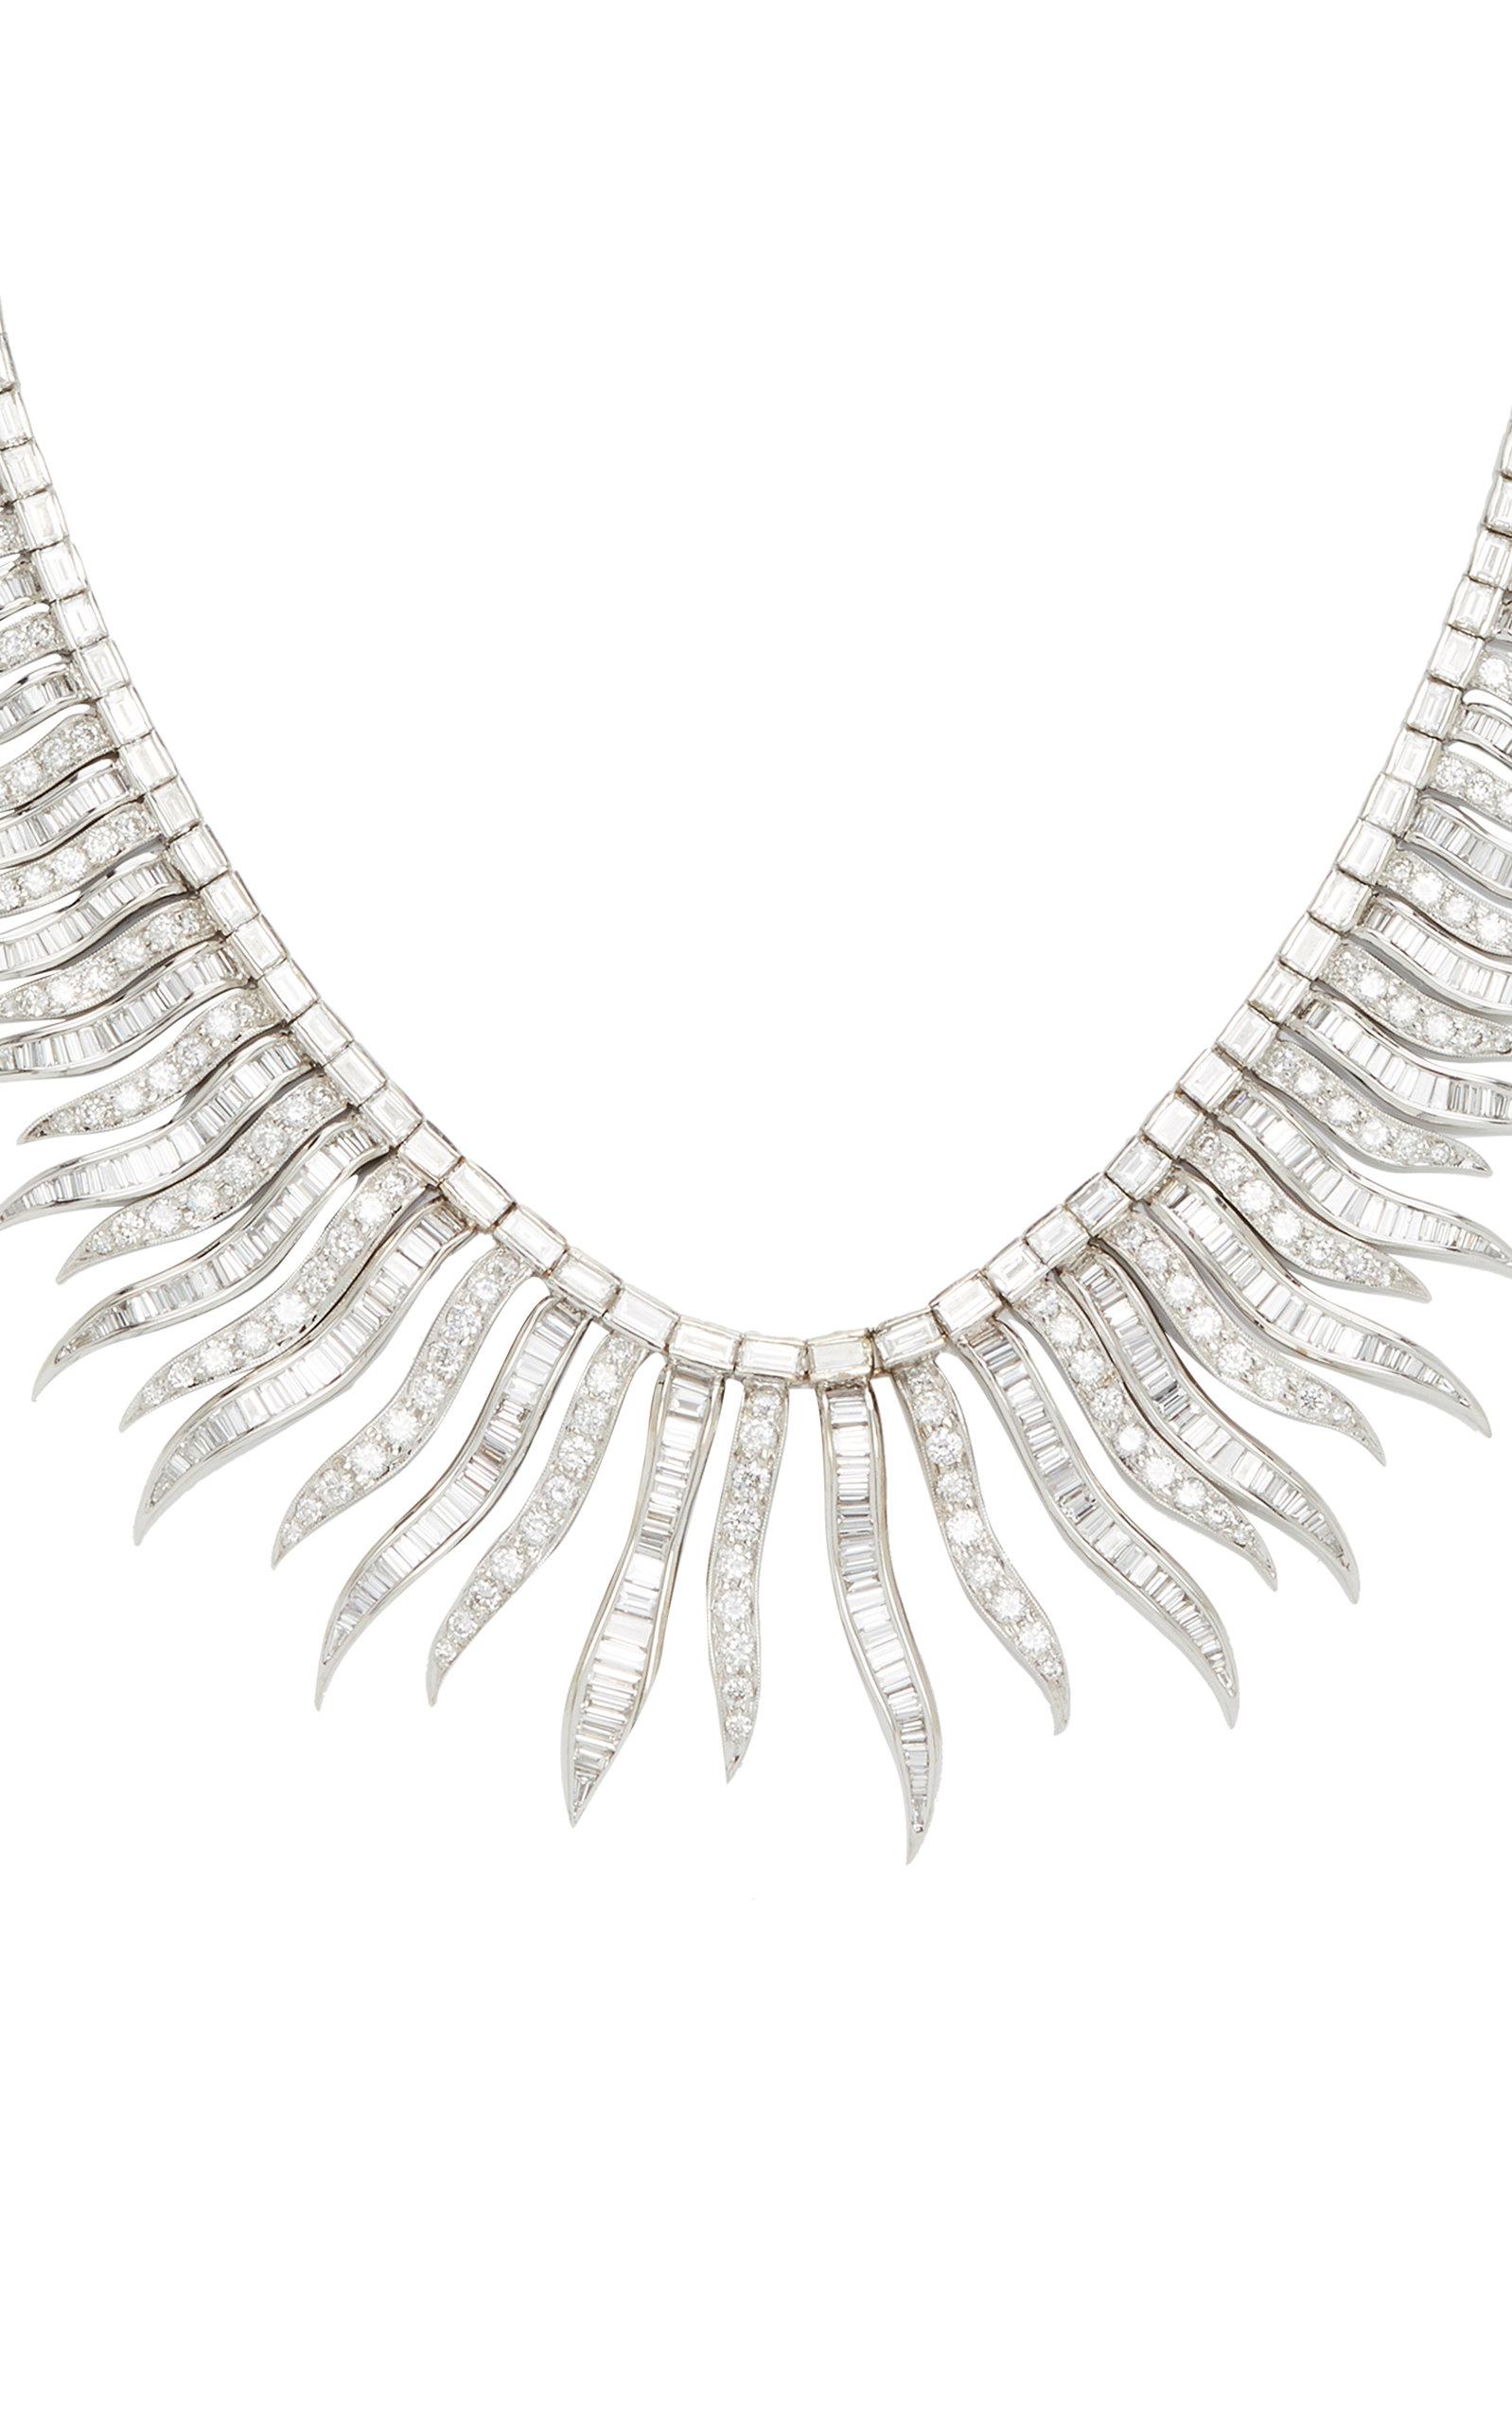 An exceptionally crafted and articulated diamond necklace in 18kt white gold with brilliant and baguette cut diamonds. Made in Italy, circa 1980s.